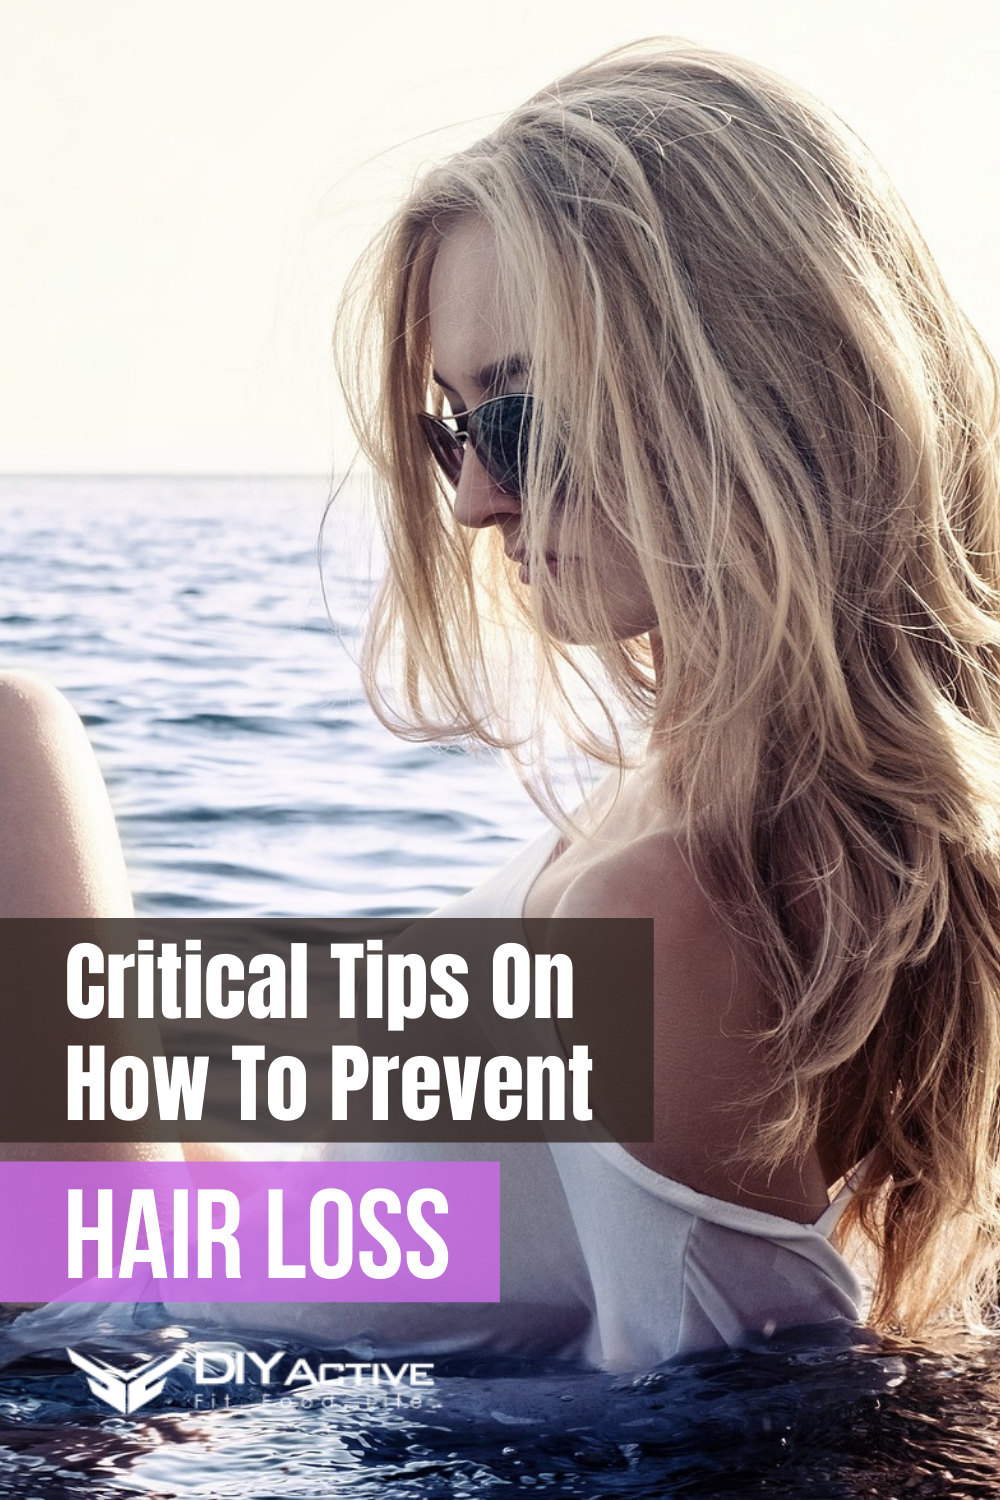 Critical Tips On How To Prevent Hair Loss